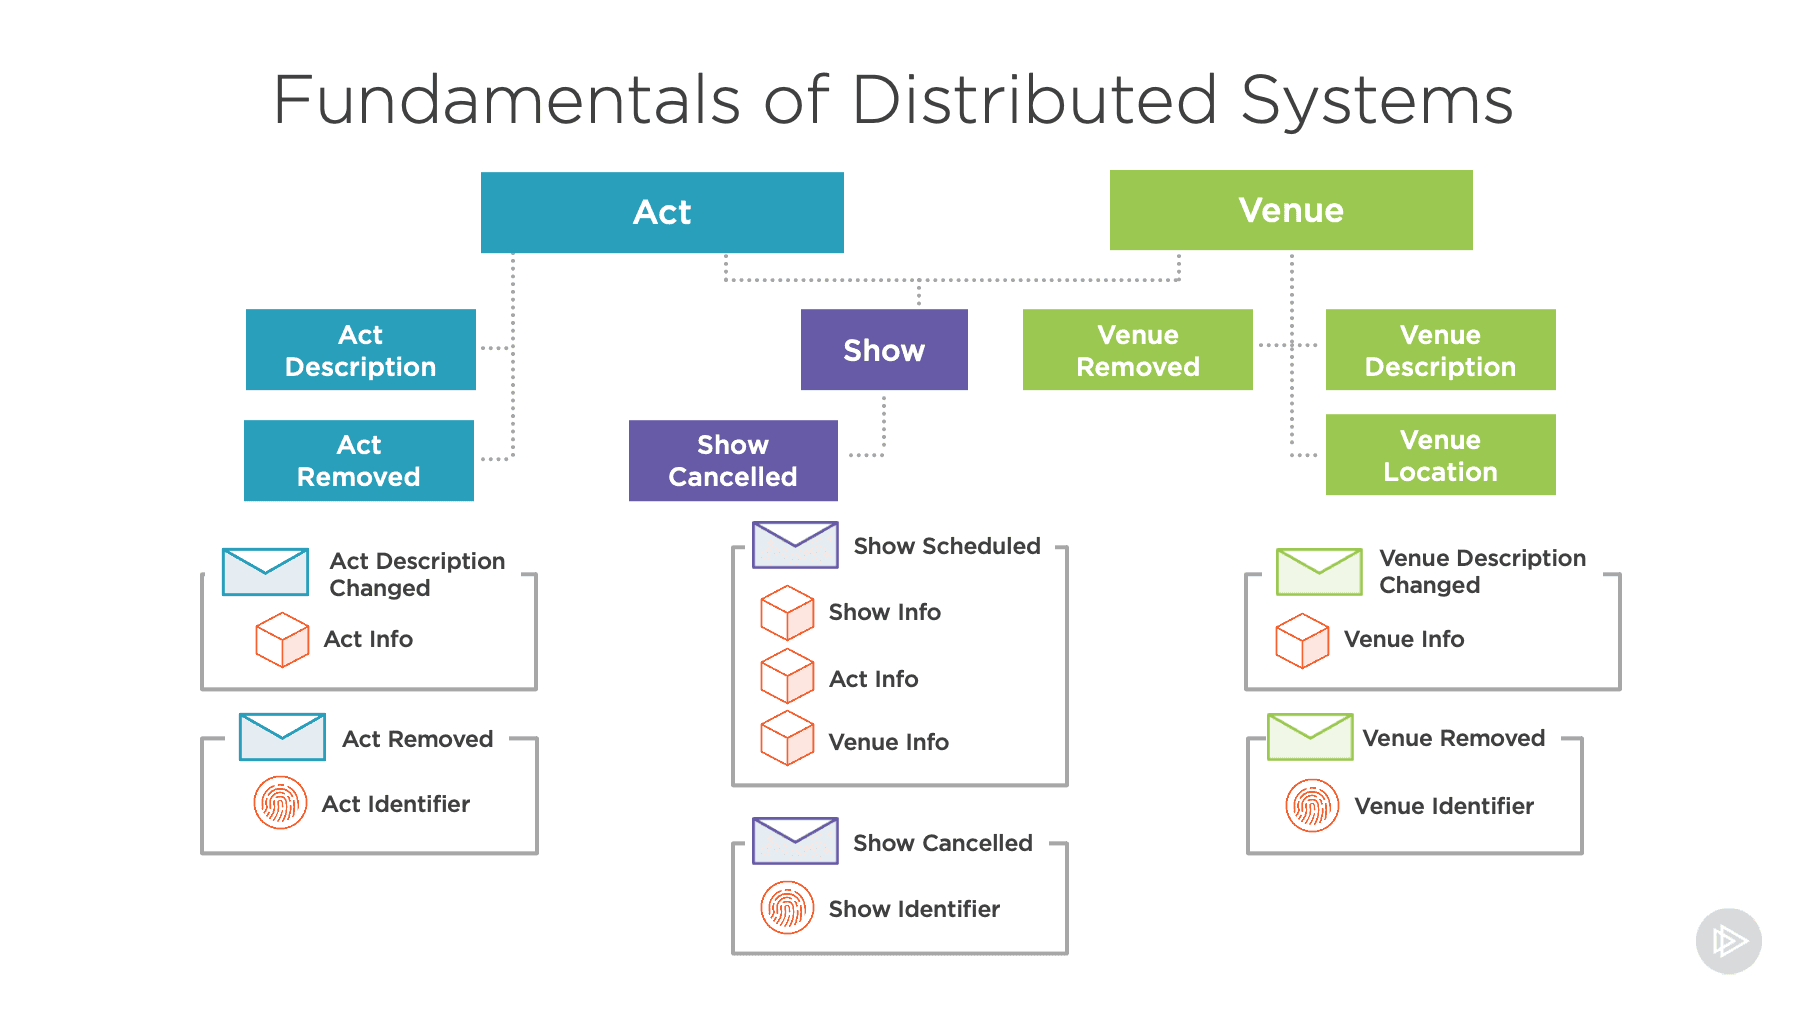 Fundamentals of Distributed Systems